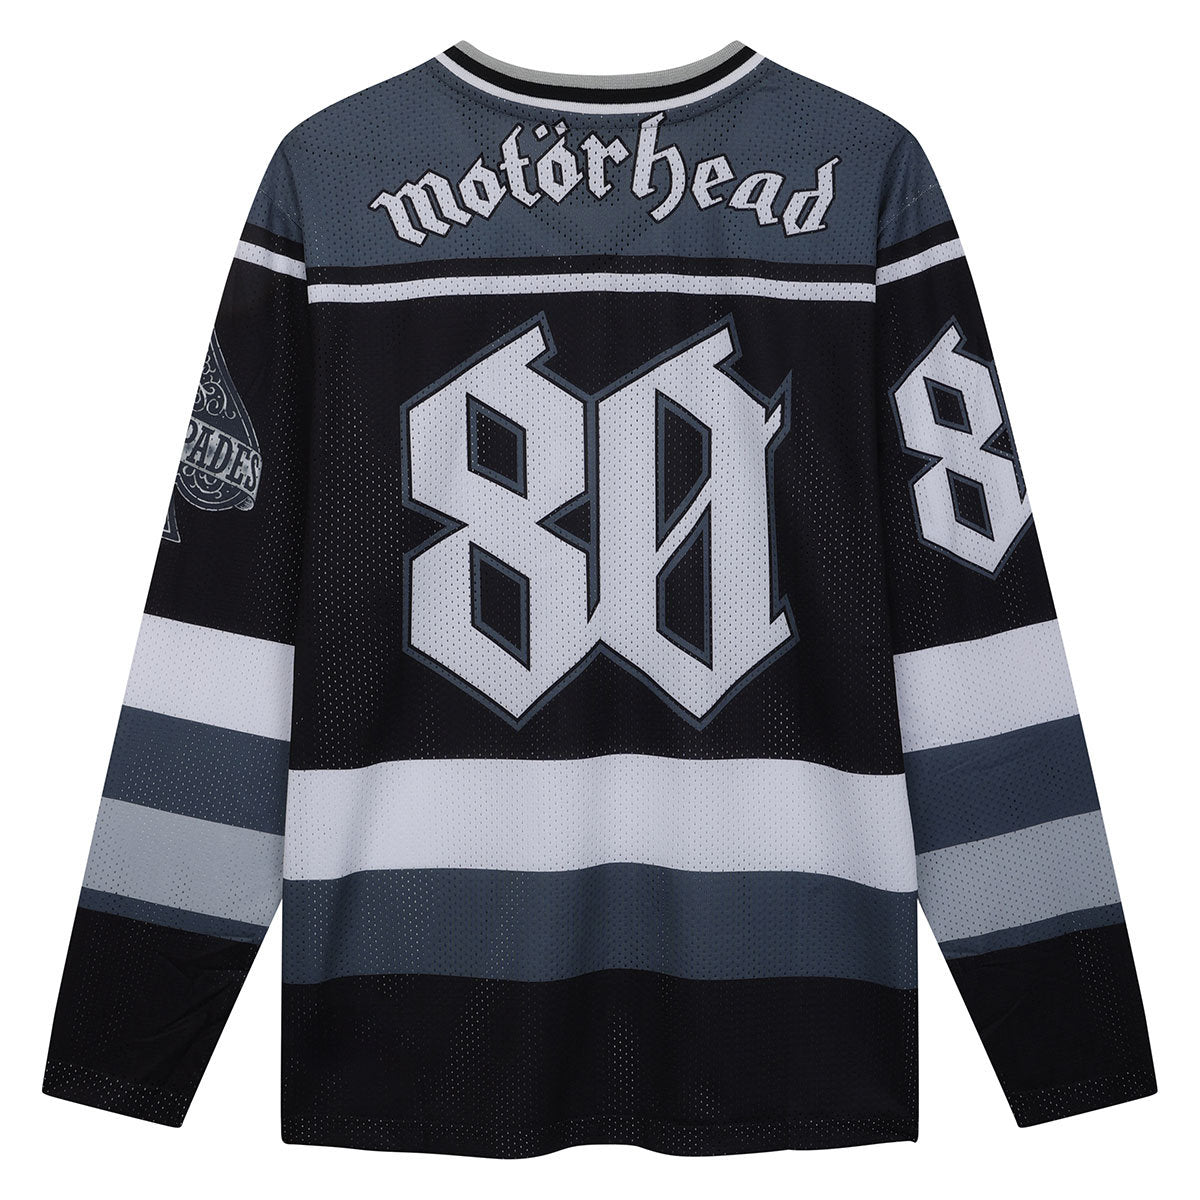 Amplified Motorhead Hockey Jersey - Official Licensed Product